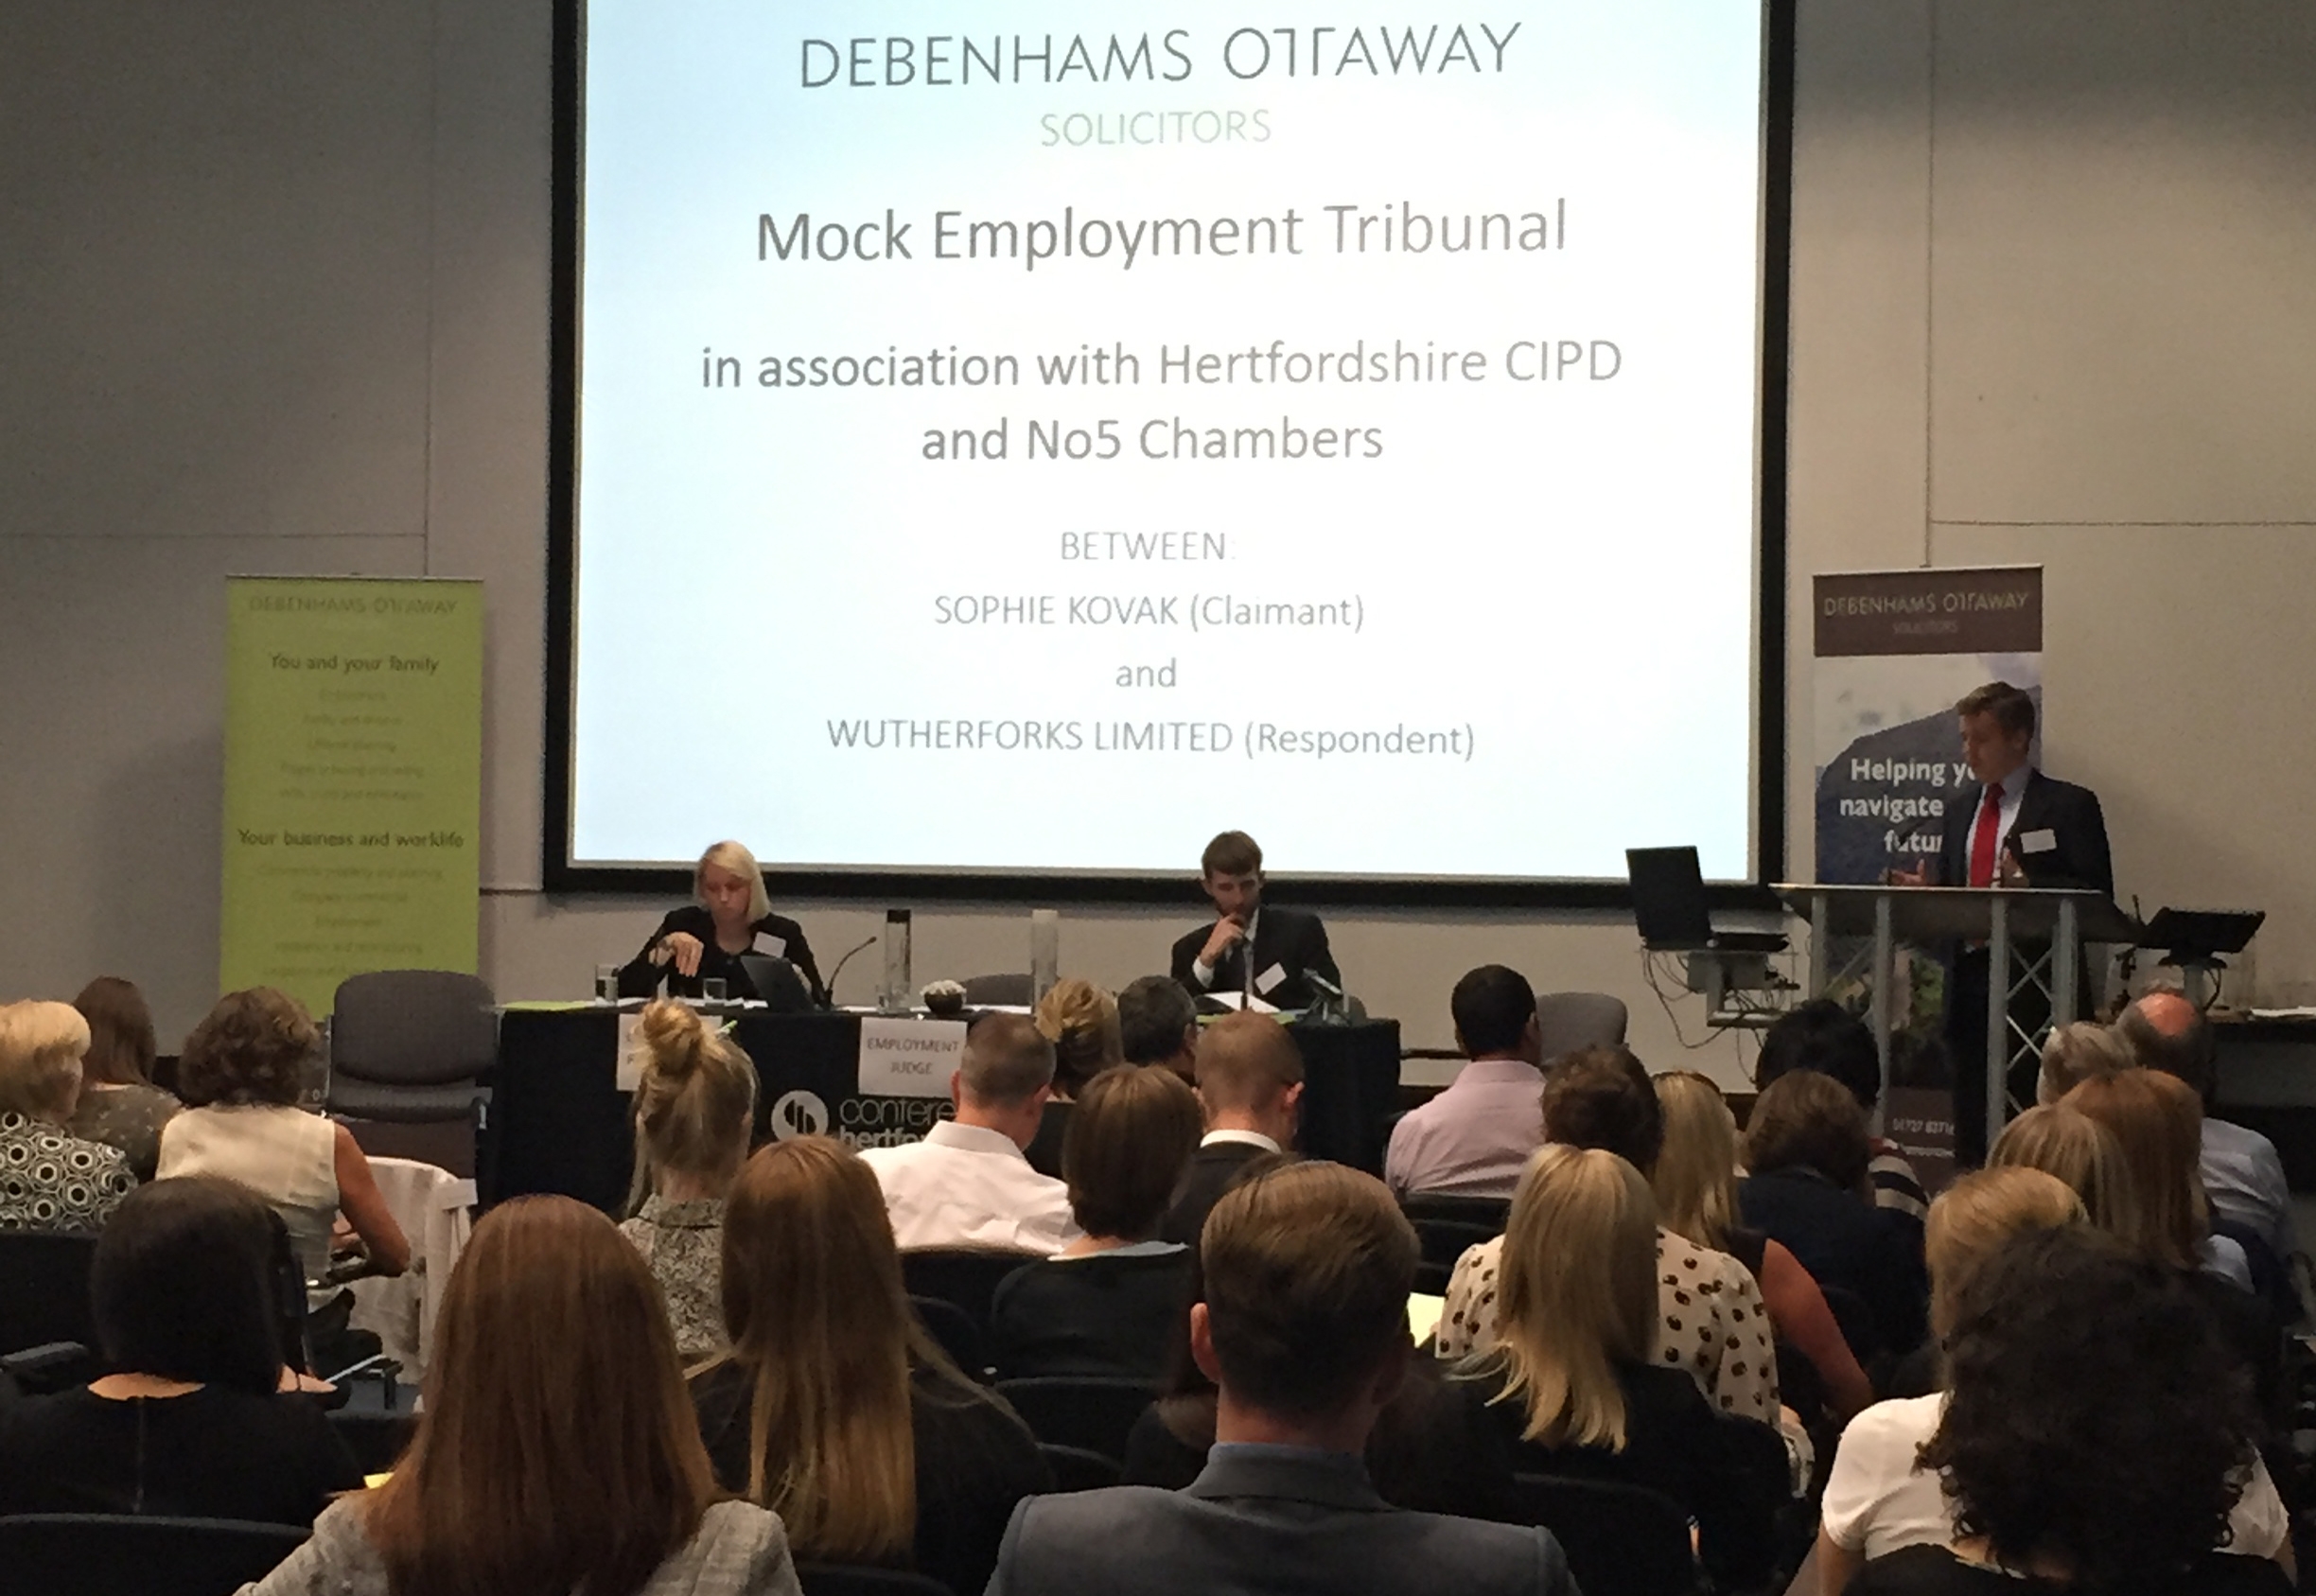 Finding out what it’s really like to be in an employment tribunal